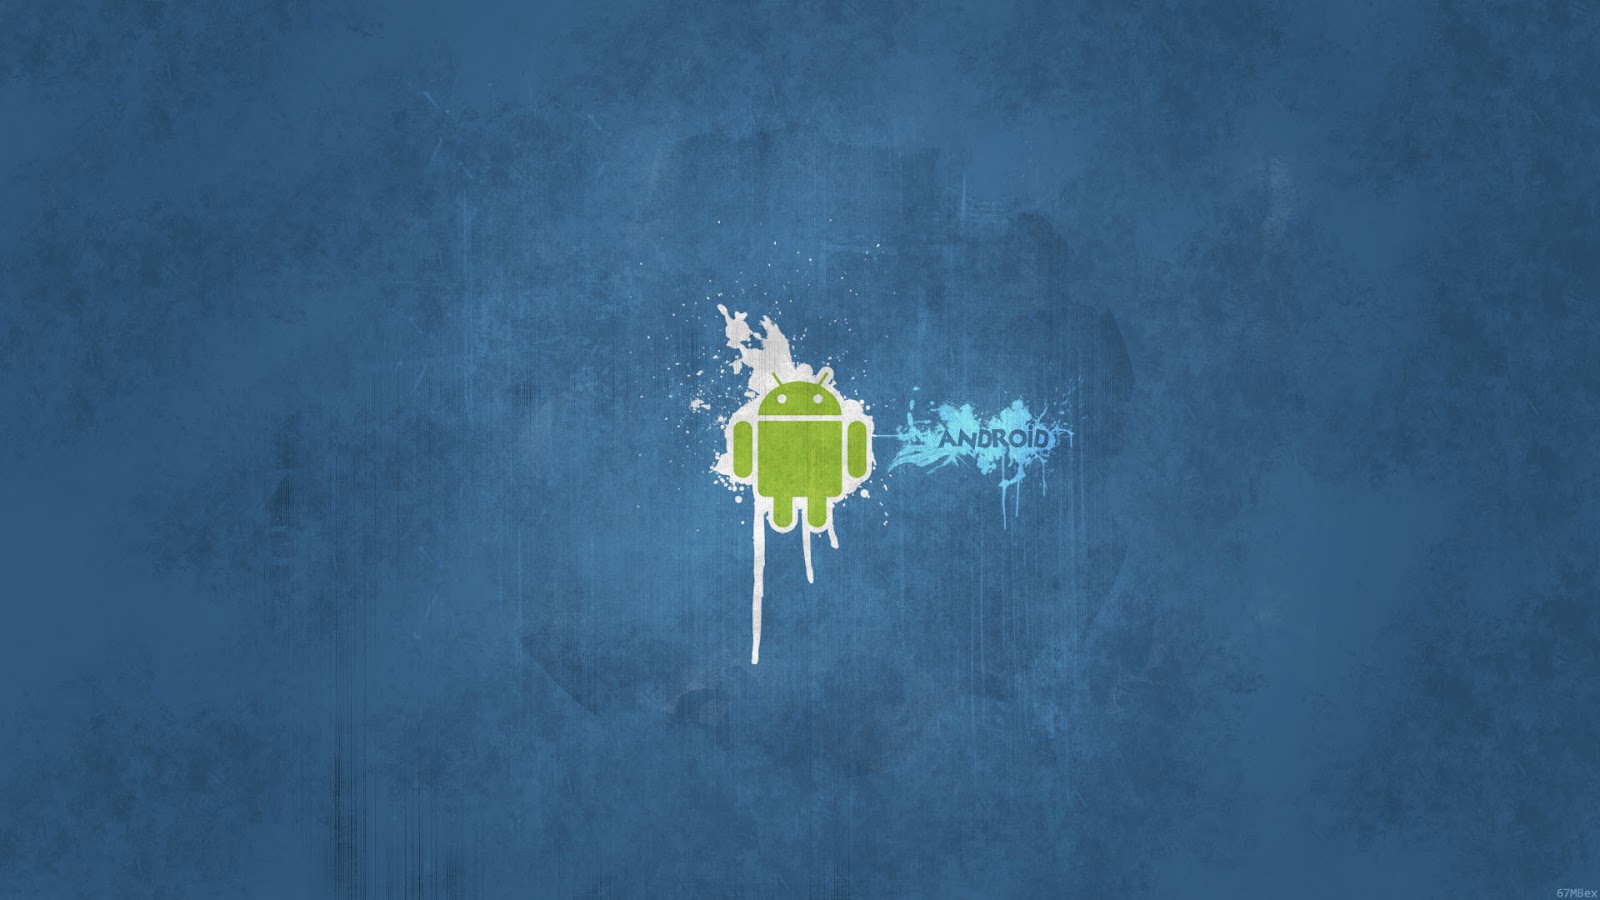 Wallpaper S Best Android